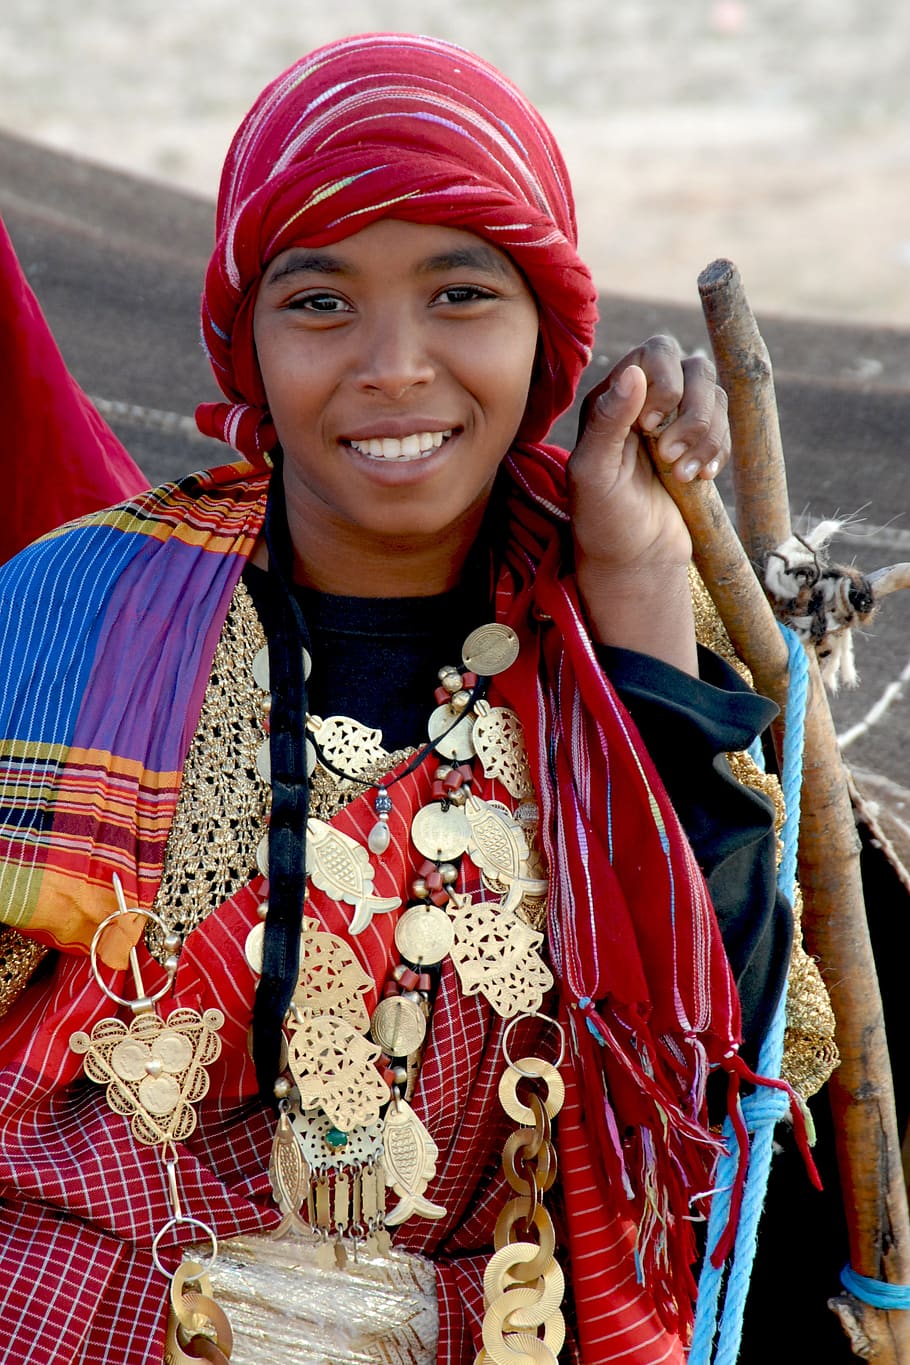 tunisia, woman, jewellery, culture, friendly, traditionally, smiling, looking at camera, one person, portrait